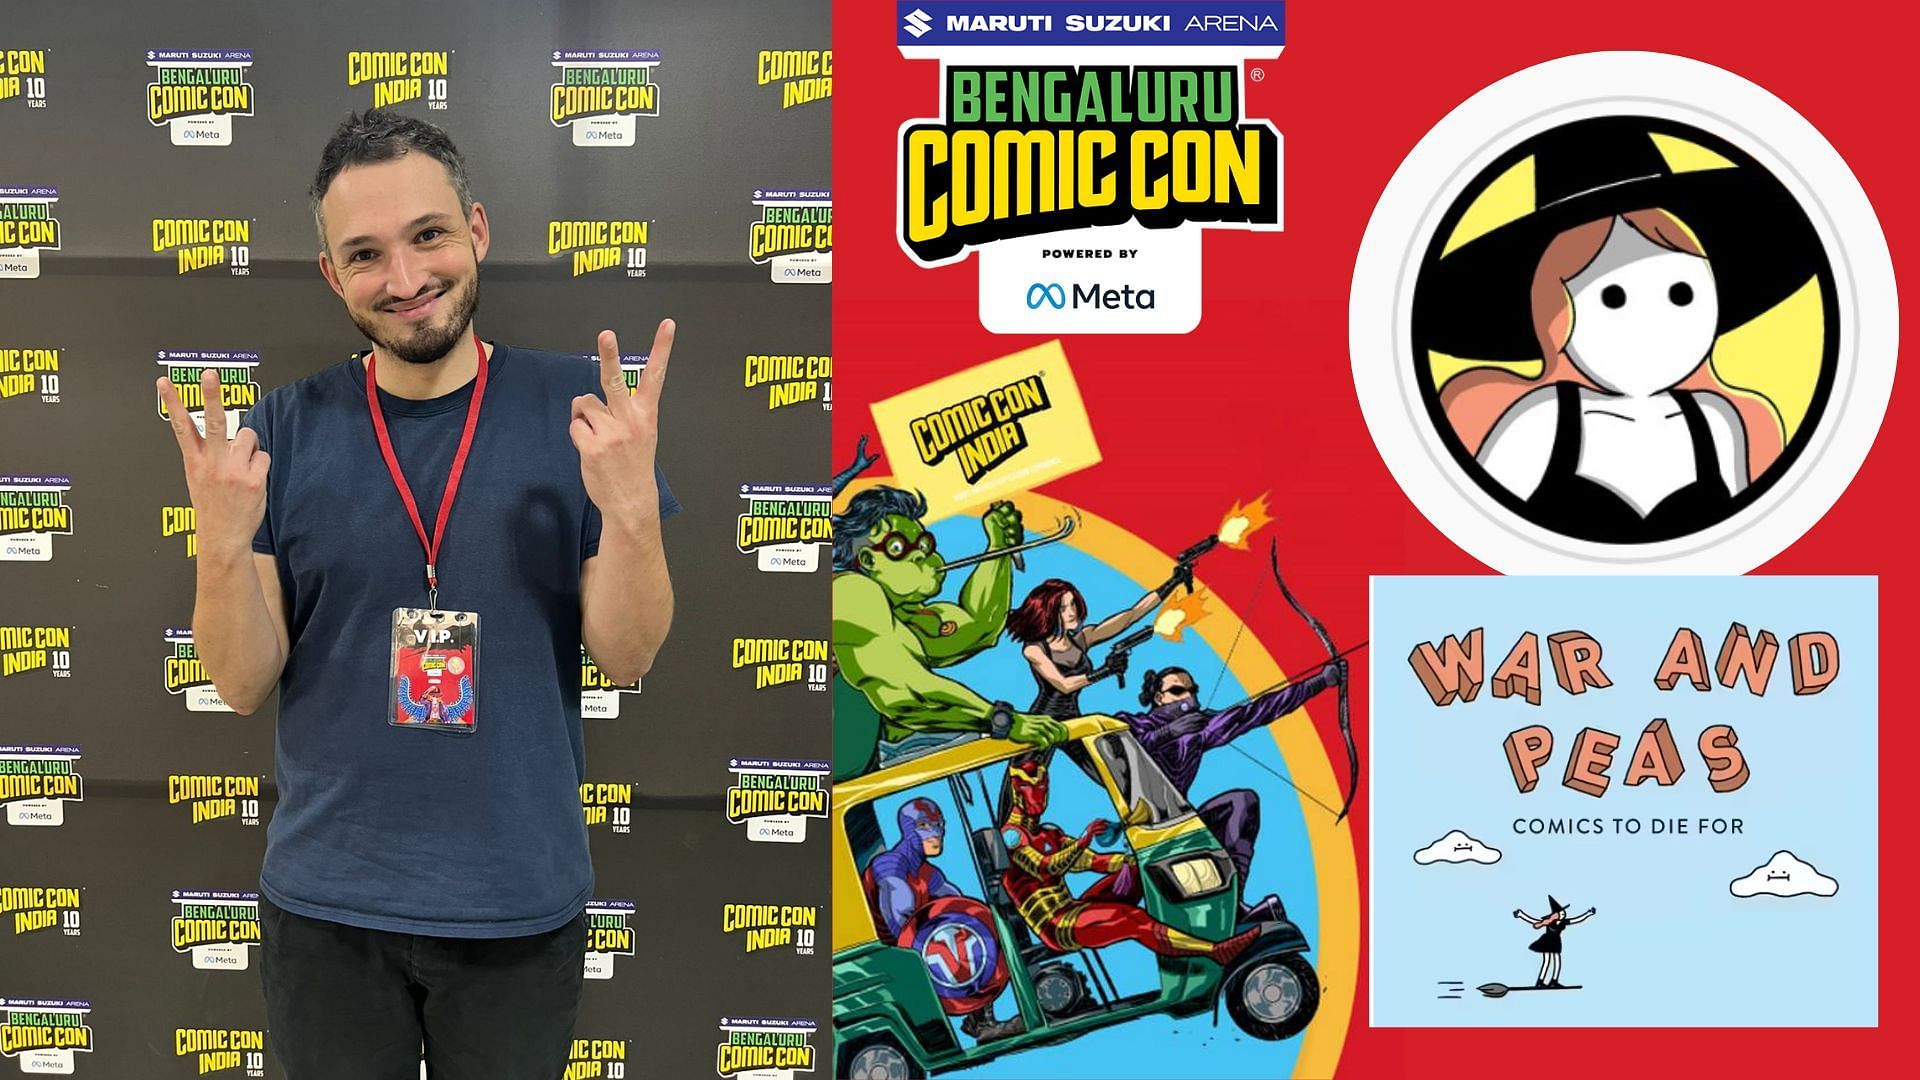 In conversation with Jonathan Kunz of War and Peas (image via warandpeas.com and Comic Con India)